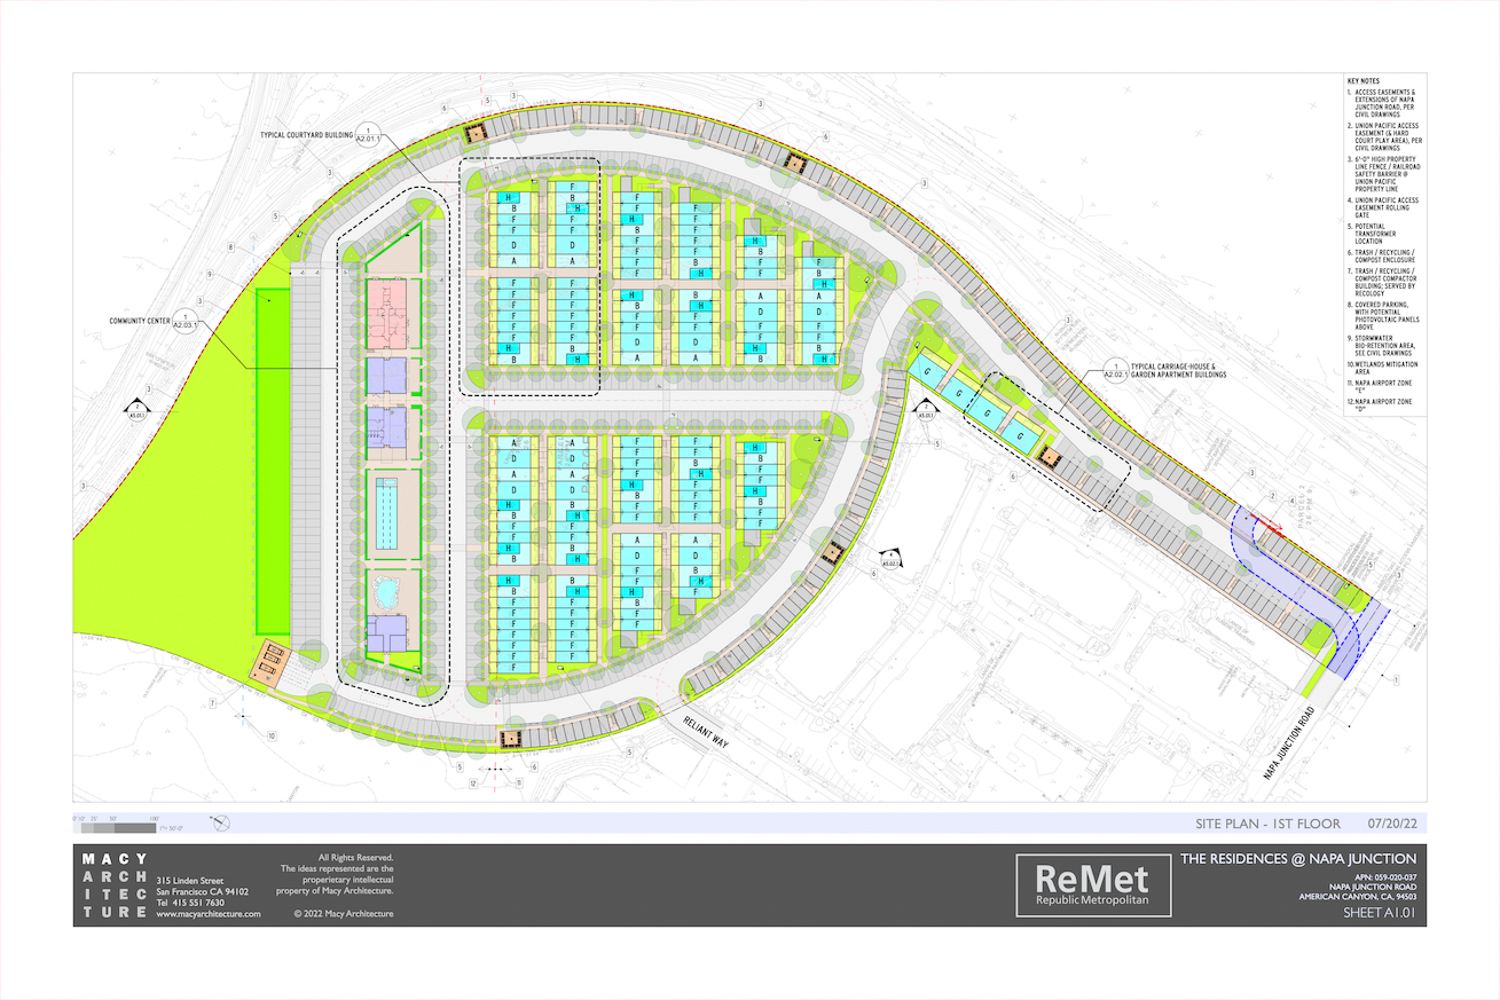 The Residence @ Napa Junction site plan, map by Macy Architecture